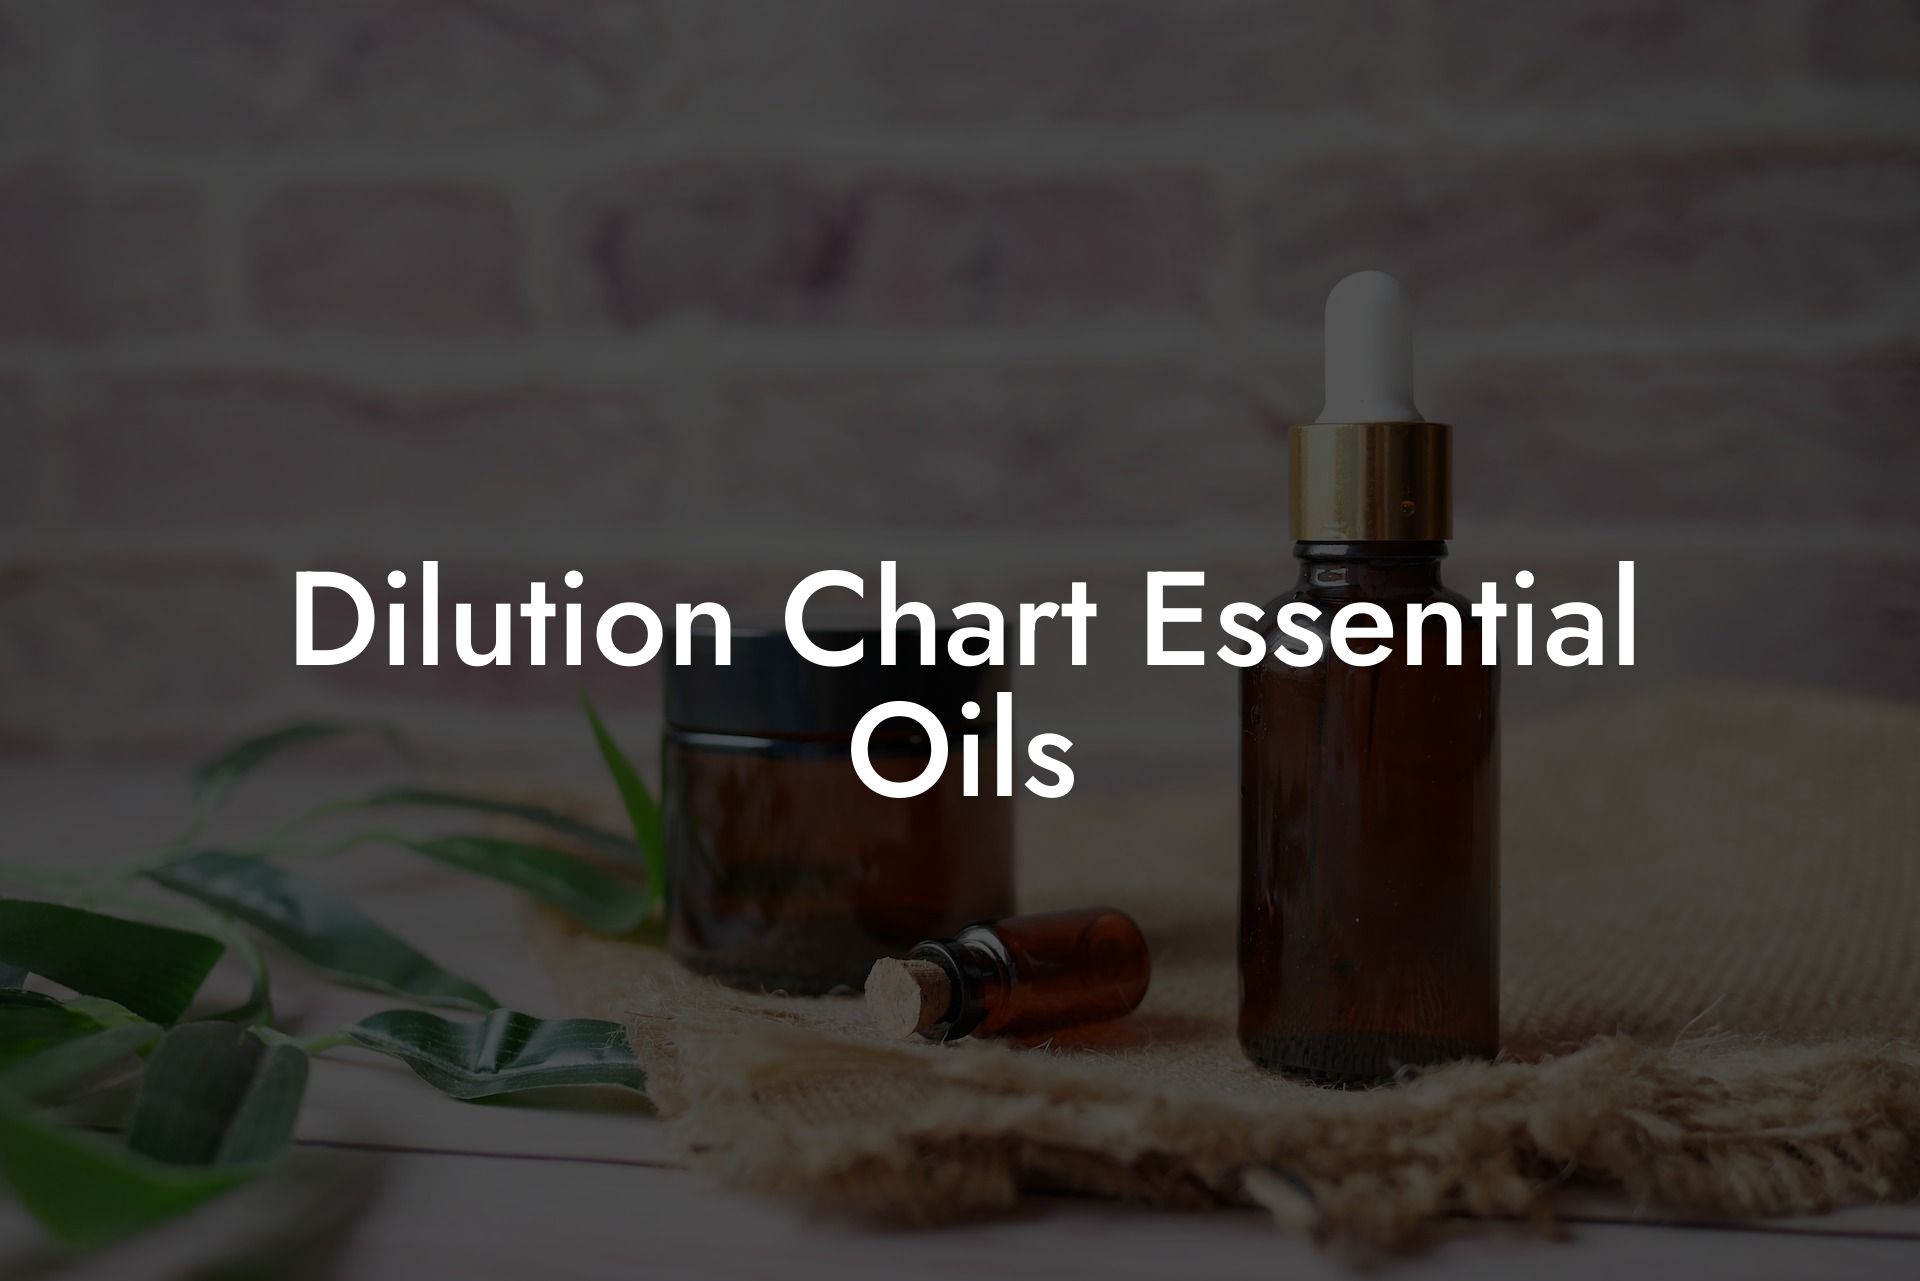 Dilution Chart Essential Oils